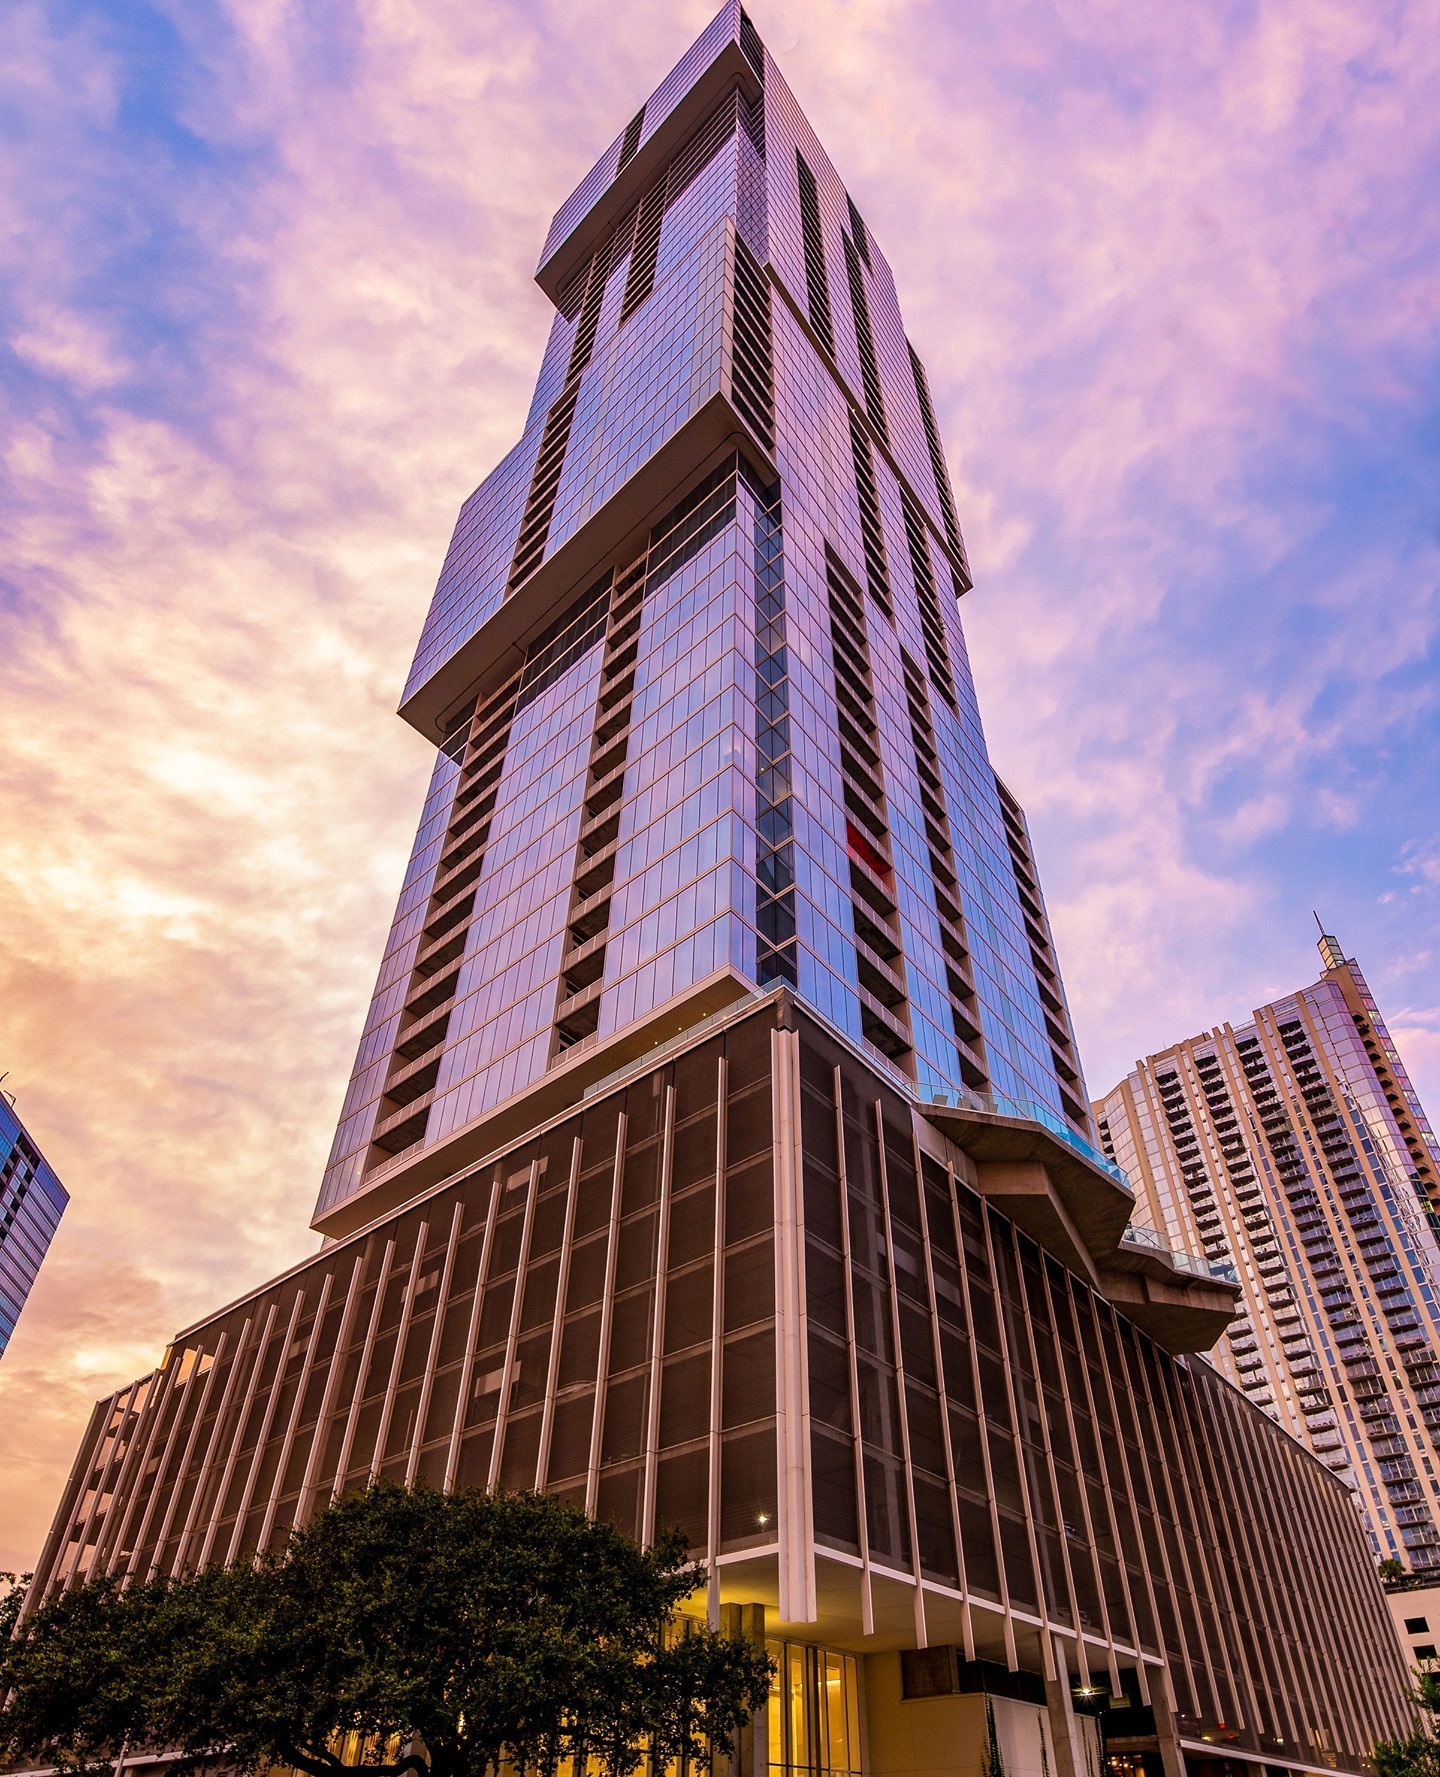 The most iconic building on Austin's skyline! ⁠
⁠
We have had the pleasure of doing so much work there, we now have a permanent office on site.